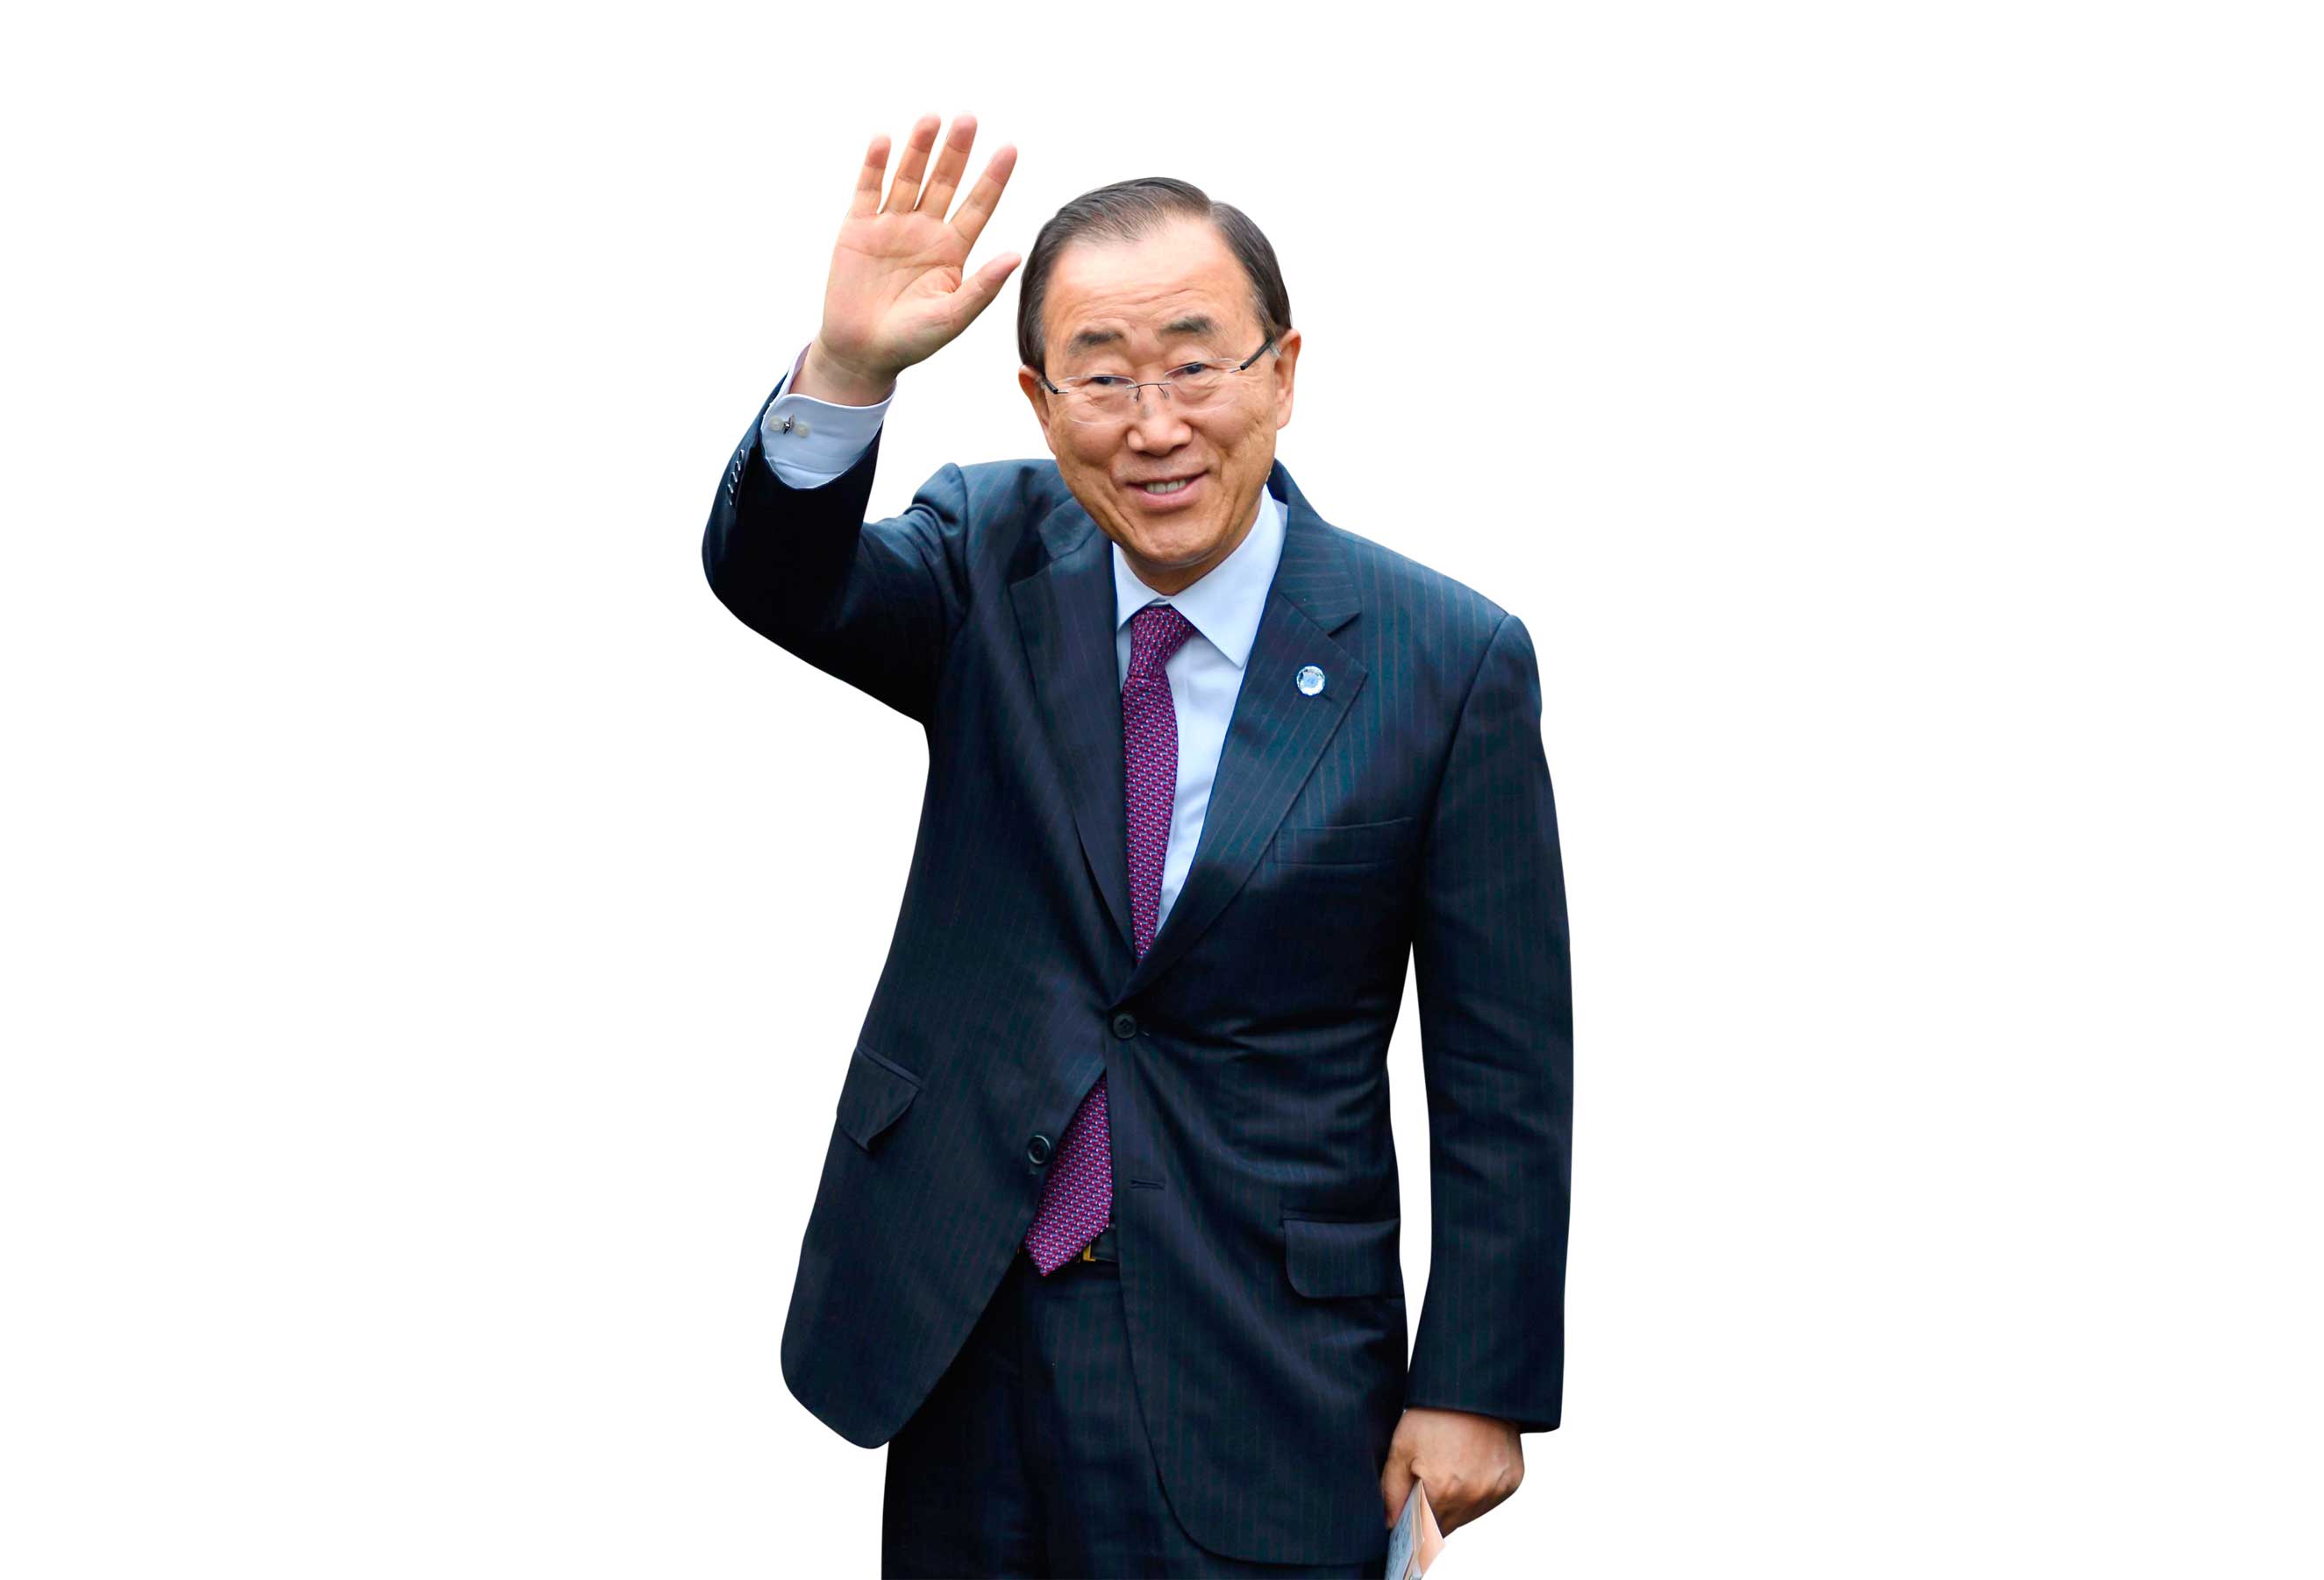 United Nations Secretary-General Ban Ki-Moon (C) gestures upon his arrival at Cyprus Peace Talks on November 7, 2016 in Mont-Pelerin, Western Switzerland where Cyprus' Greek and Turkish speaking communities will conduct a key phase of reunification talks, under the aegis of the United Nations. (Fabrice Coffrini—AFP/Getty Image)